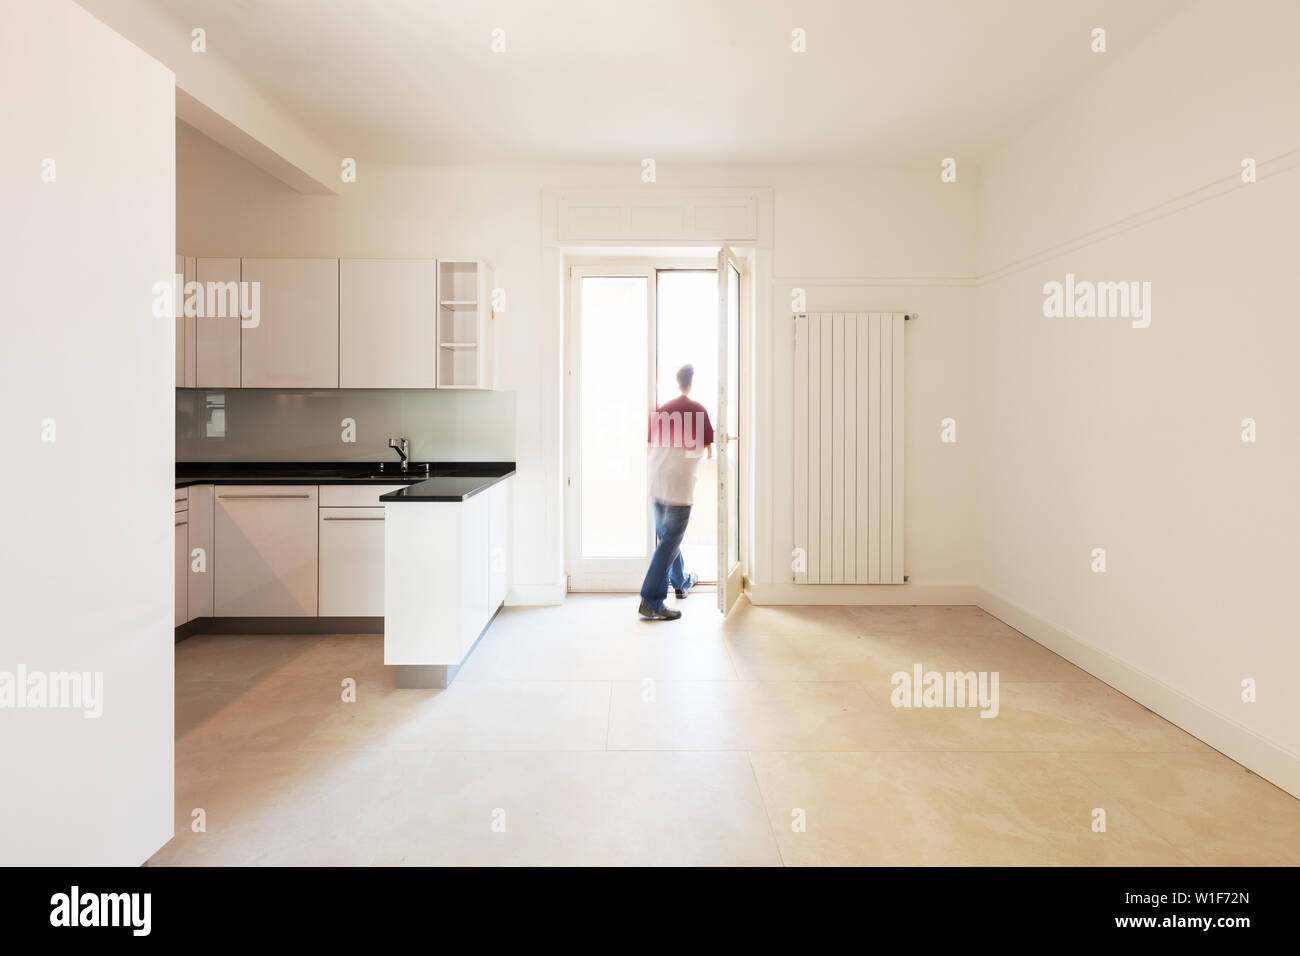 Man standing in the window kitchen Stock Photo